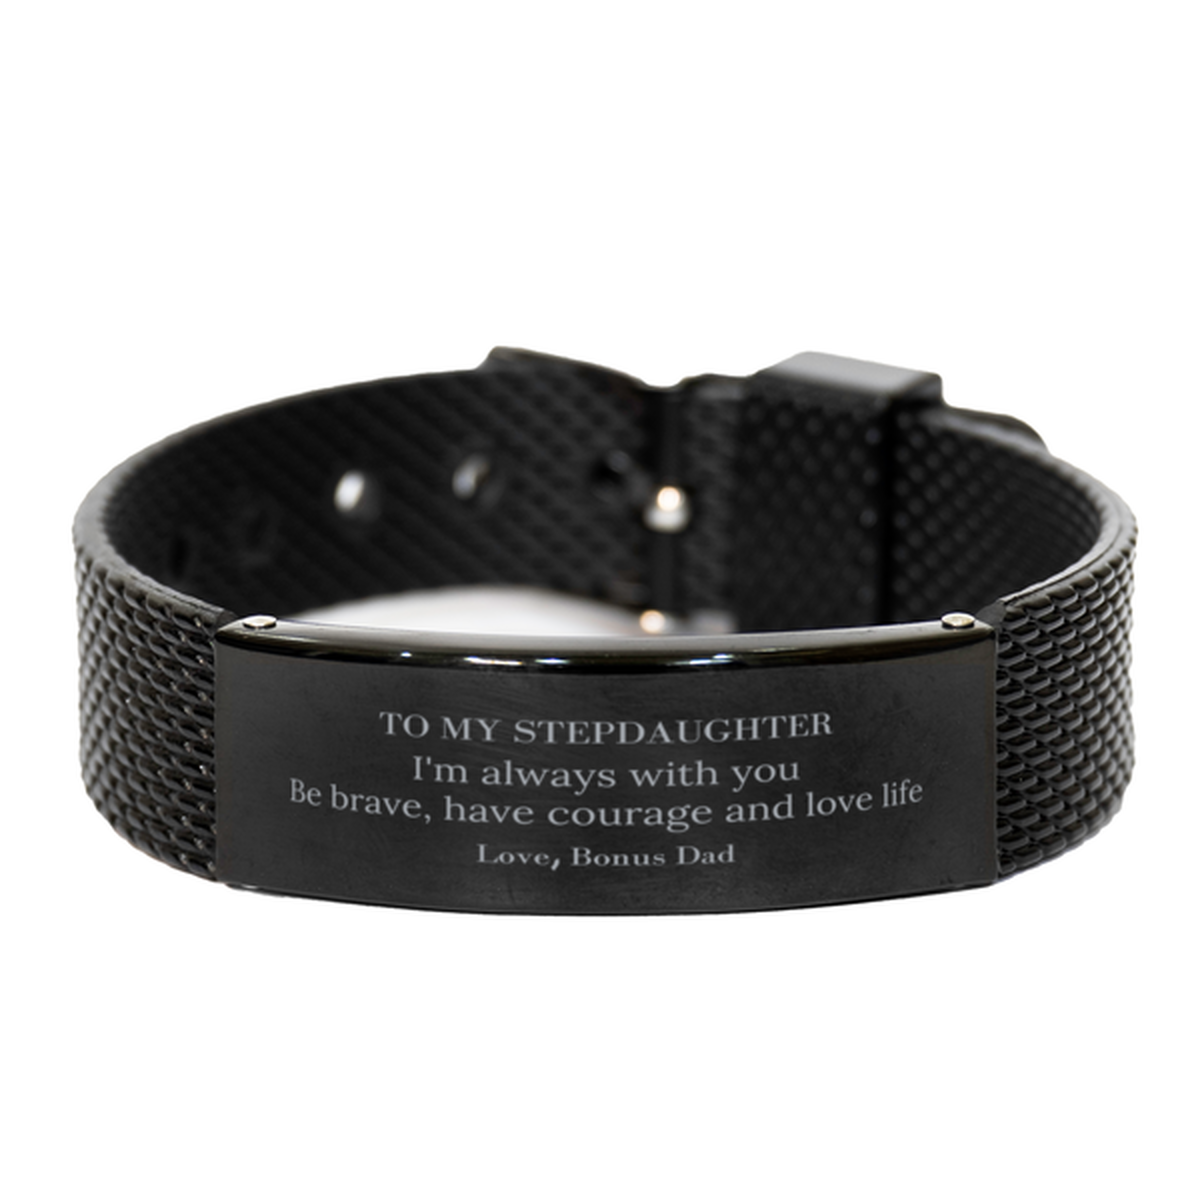 To My Stepdaughter Gifts from Bonus Dad, Unique Black Shark Mesh Bracelet Inspirational Christmas Birthday Graduation Gifts for Stepdaughter I'm always with you. Be brave, have courage and love life. Love, Bonus Dad